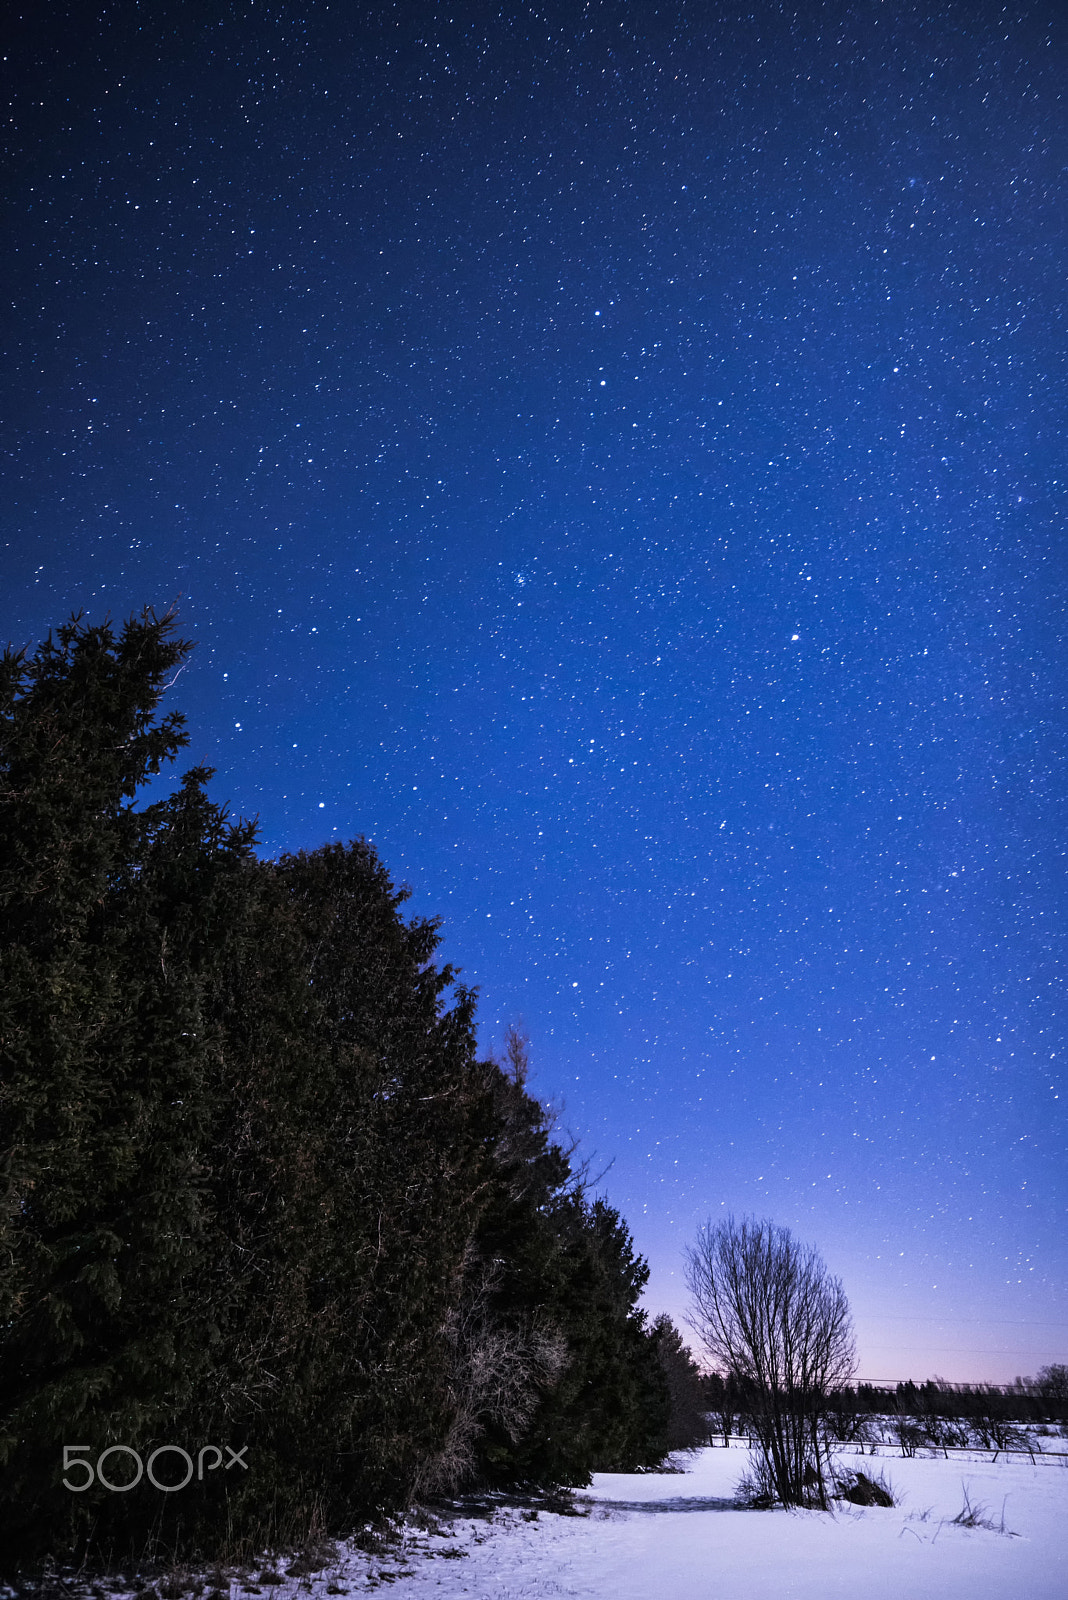 Nikon D800 sample photo. Rural winter landscape at night with trees and stars photography